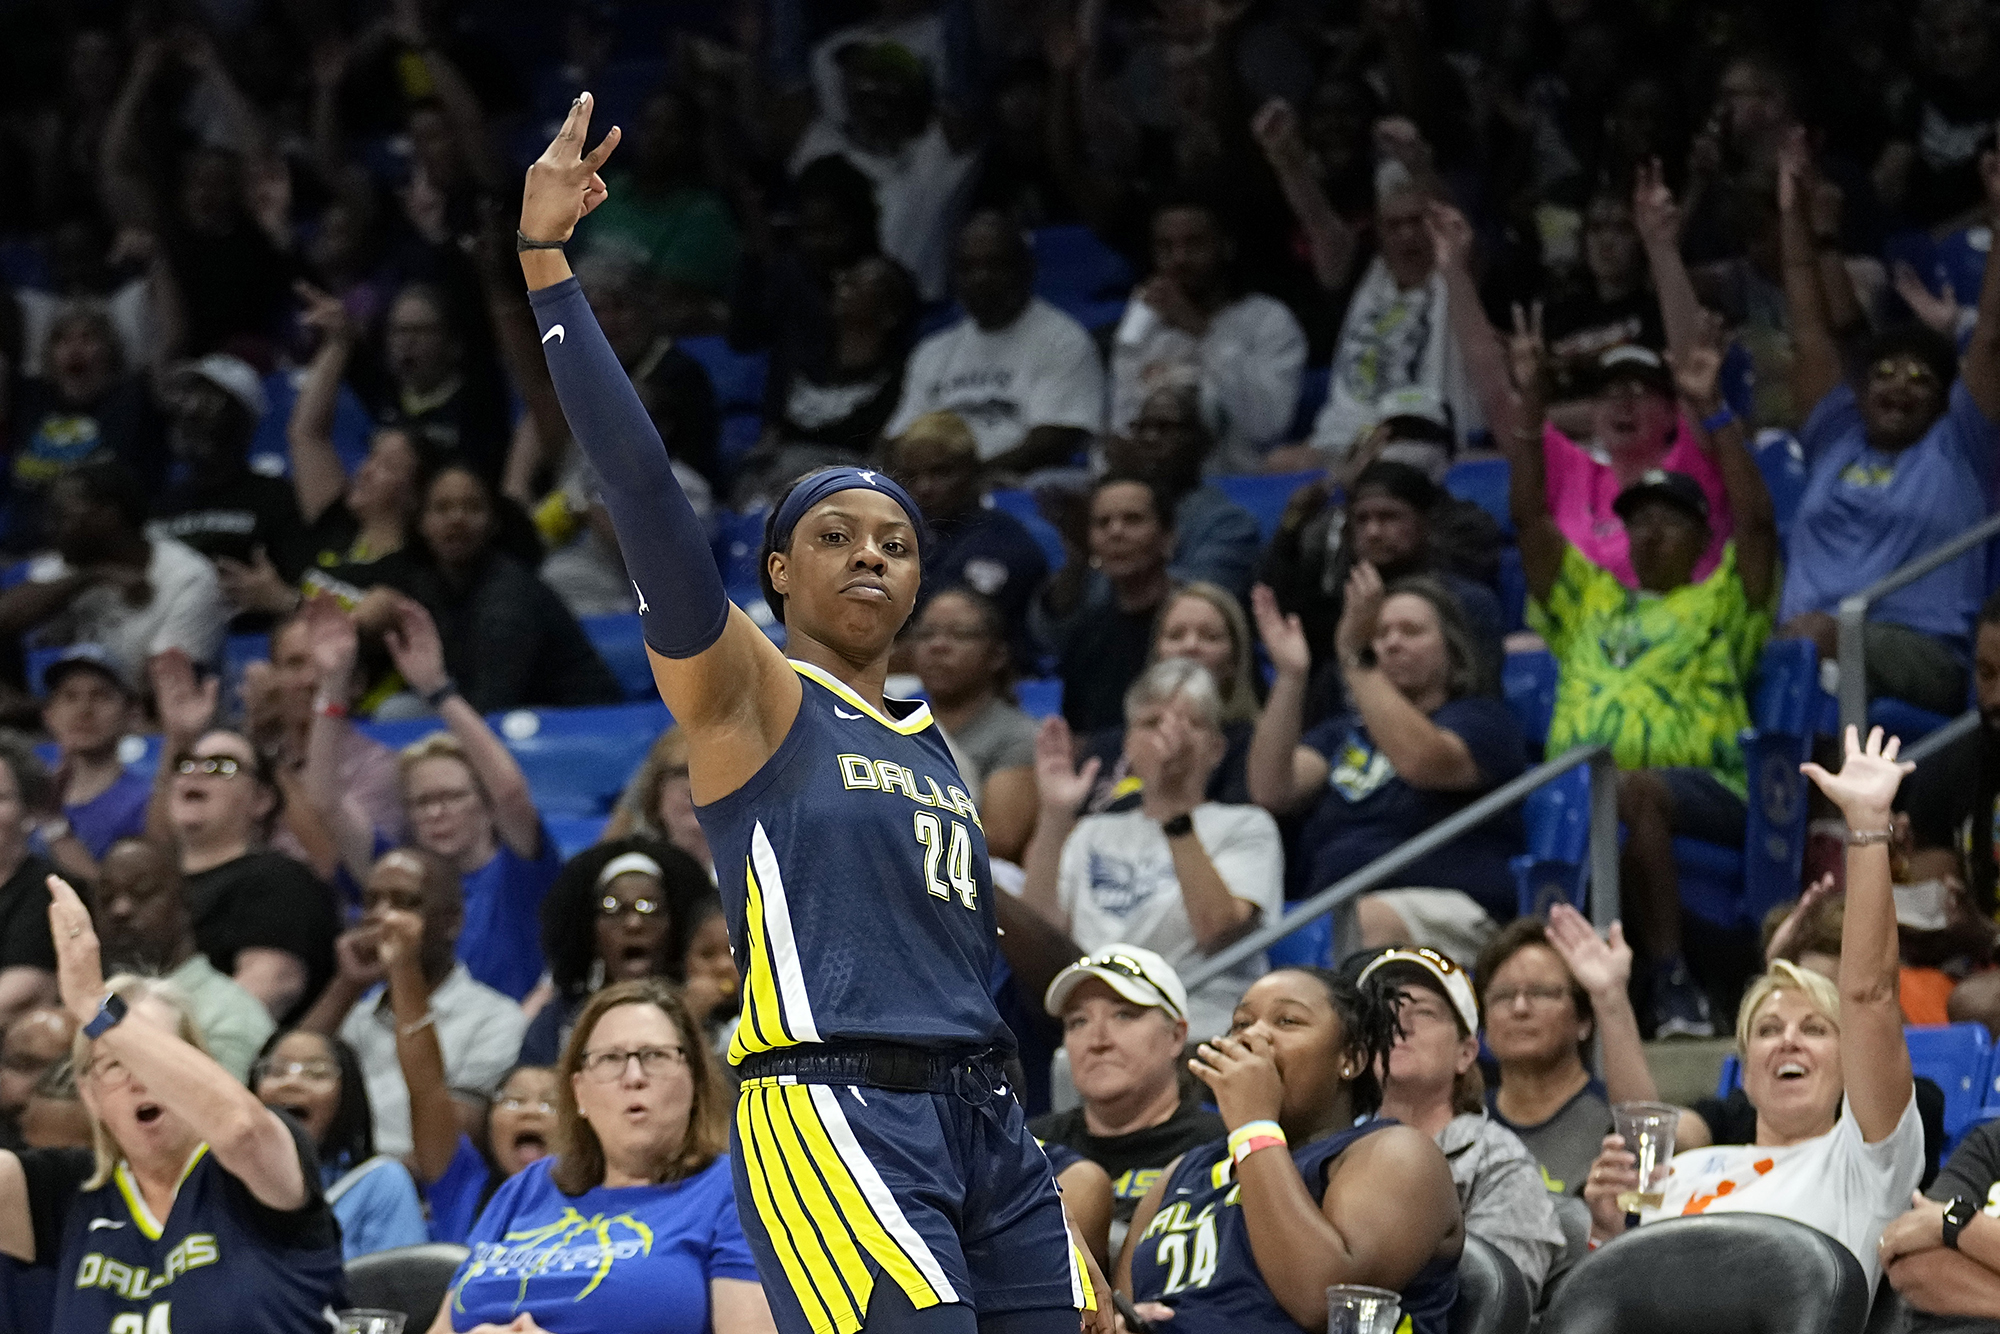 Dallas Wings guard Arike Ogunbowale celebrates after sinking a 3-point basket during the first half of the team's WNBA basketball game against the Washington Mystics, Friday, July 28, 2023, in Arlington, Texas.